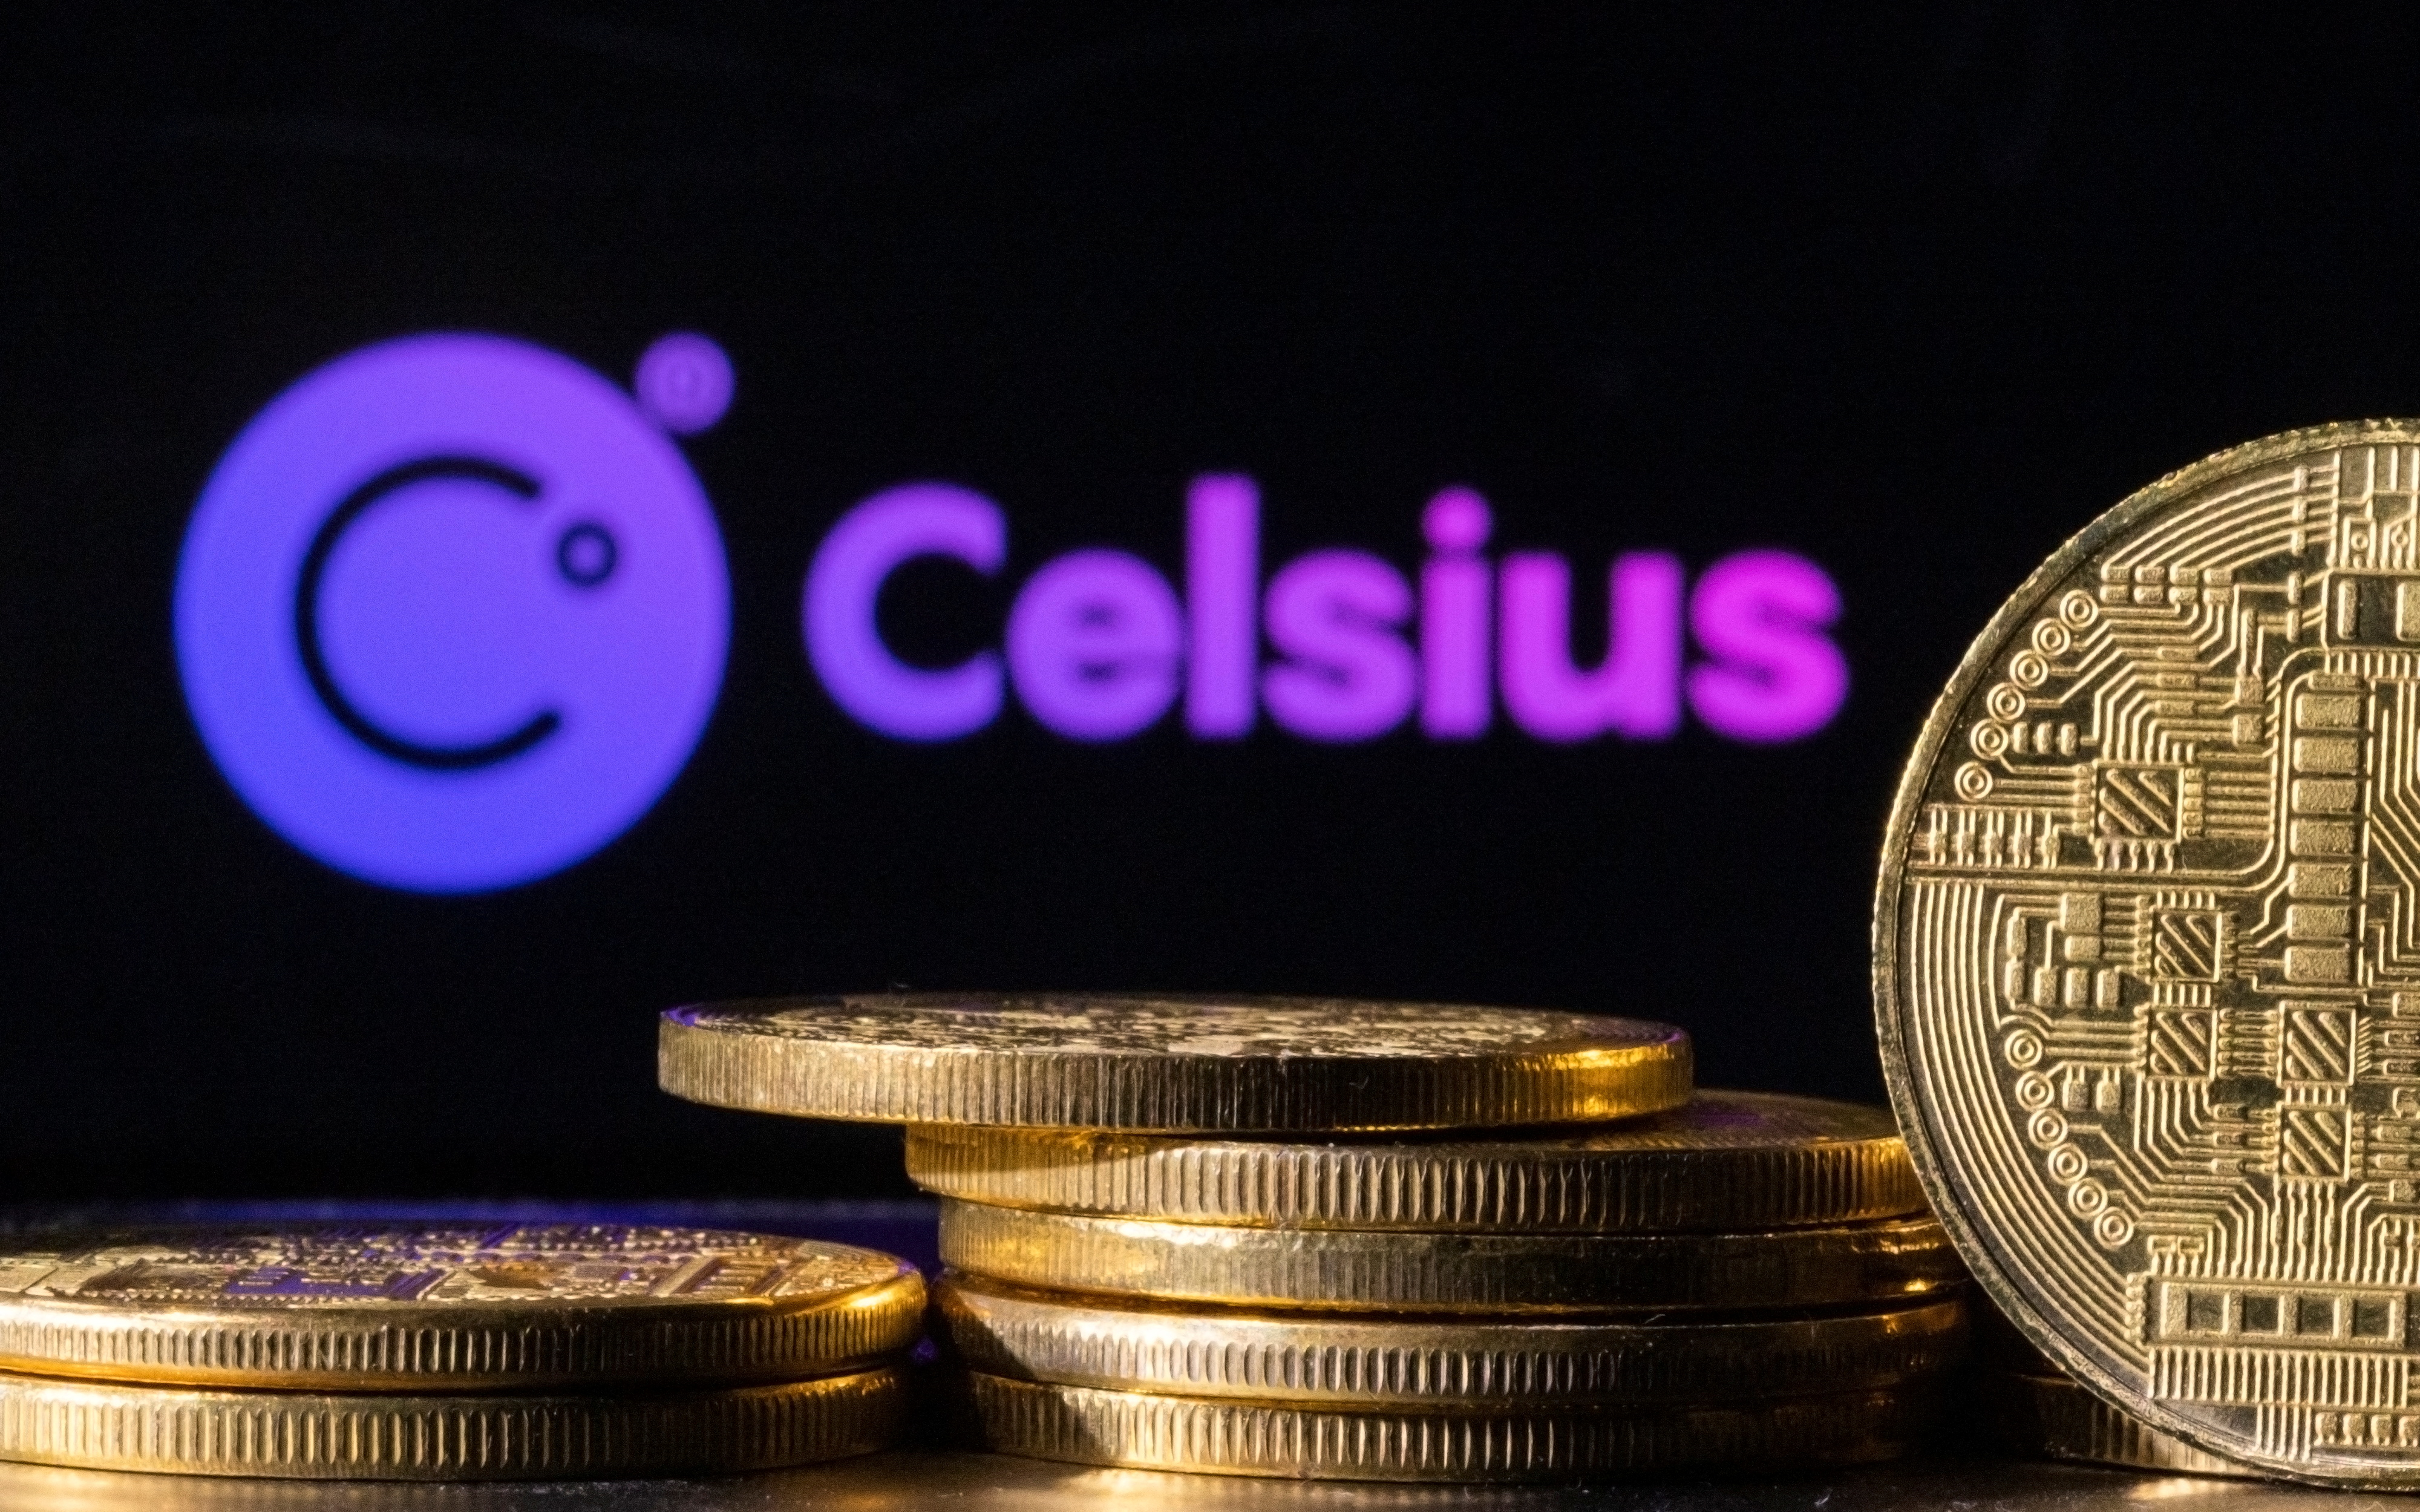 Crypto lender Celsius is being investigated by multiple states after transactions freeze | Engadget